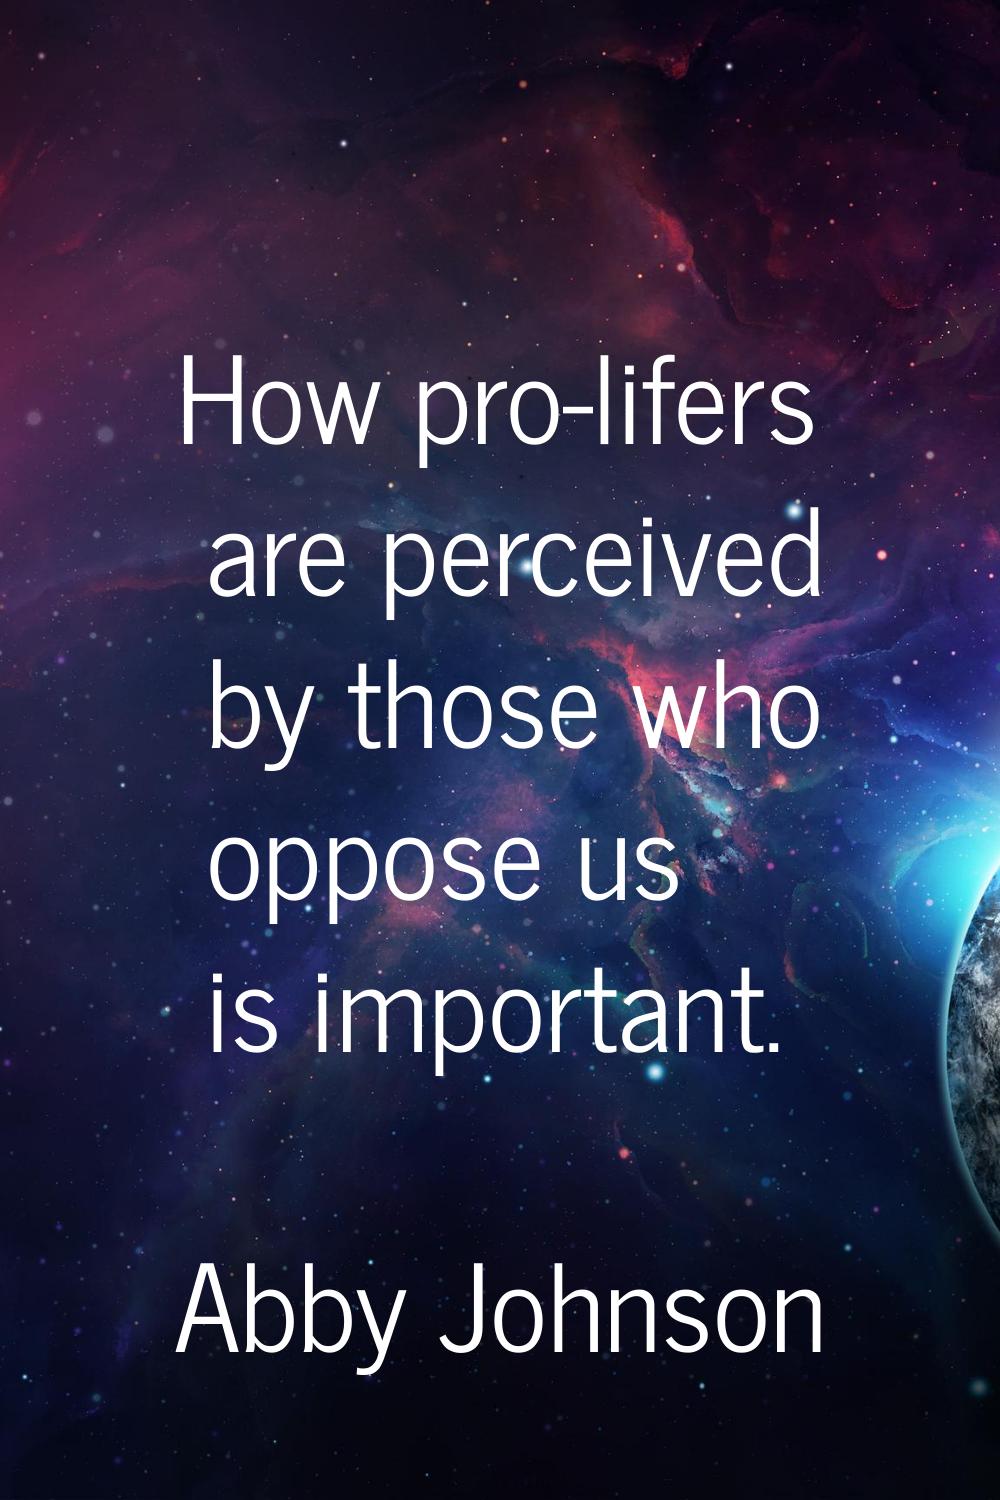 How pro-lifers are perceived by those who oppose us is important.